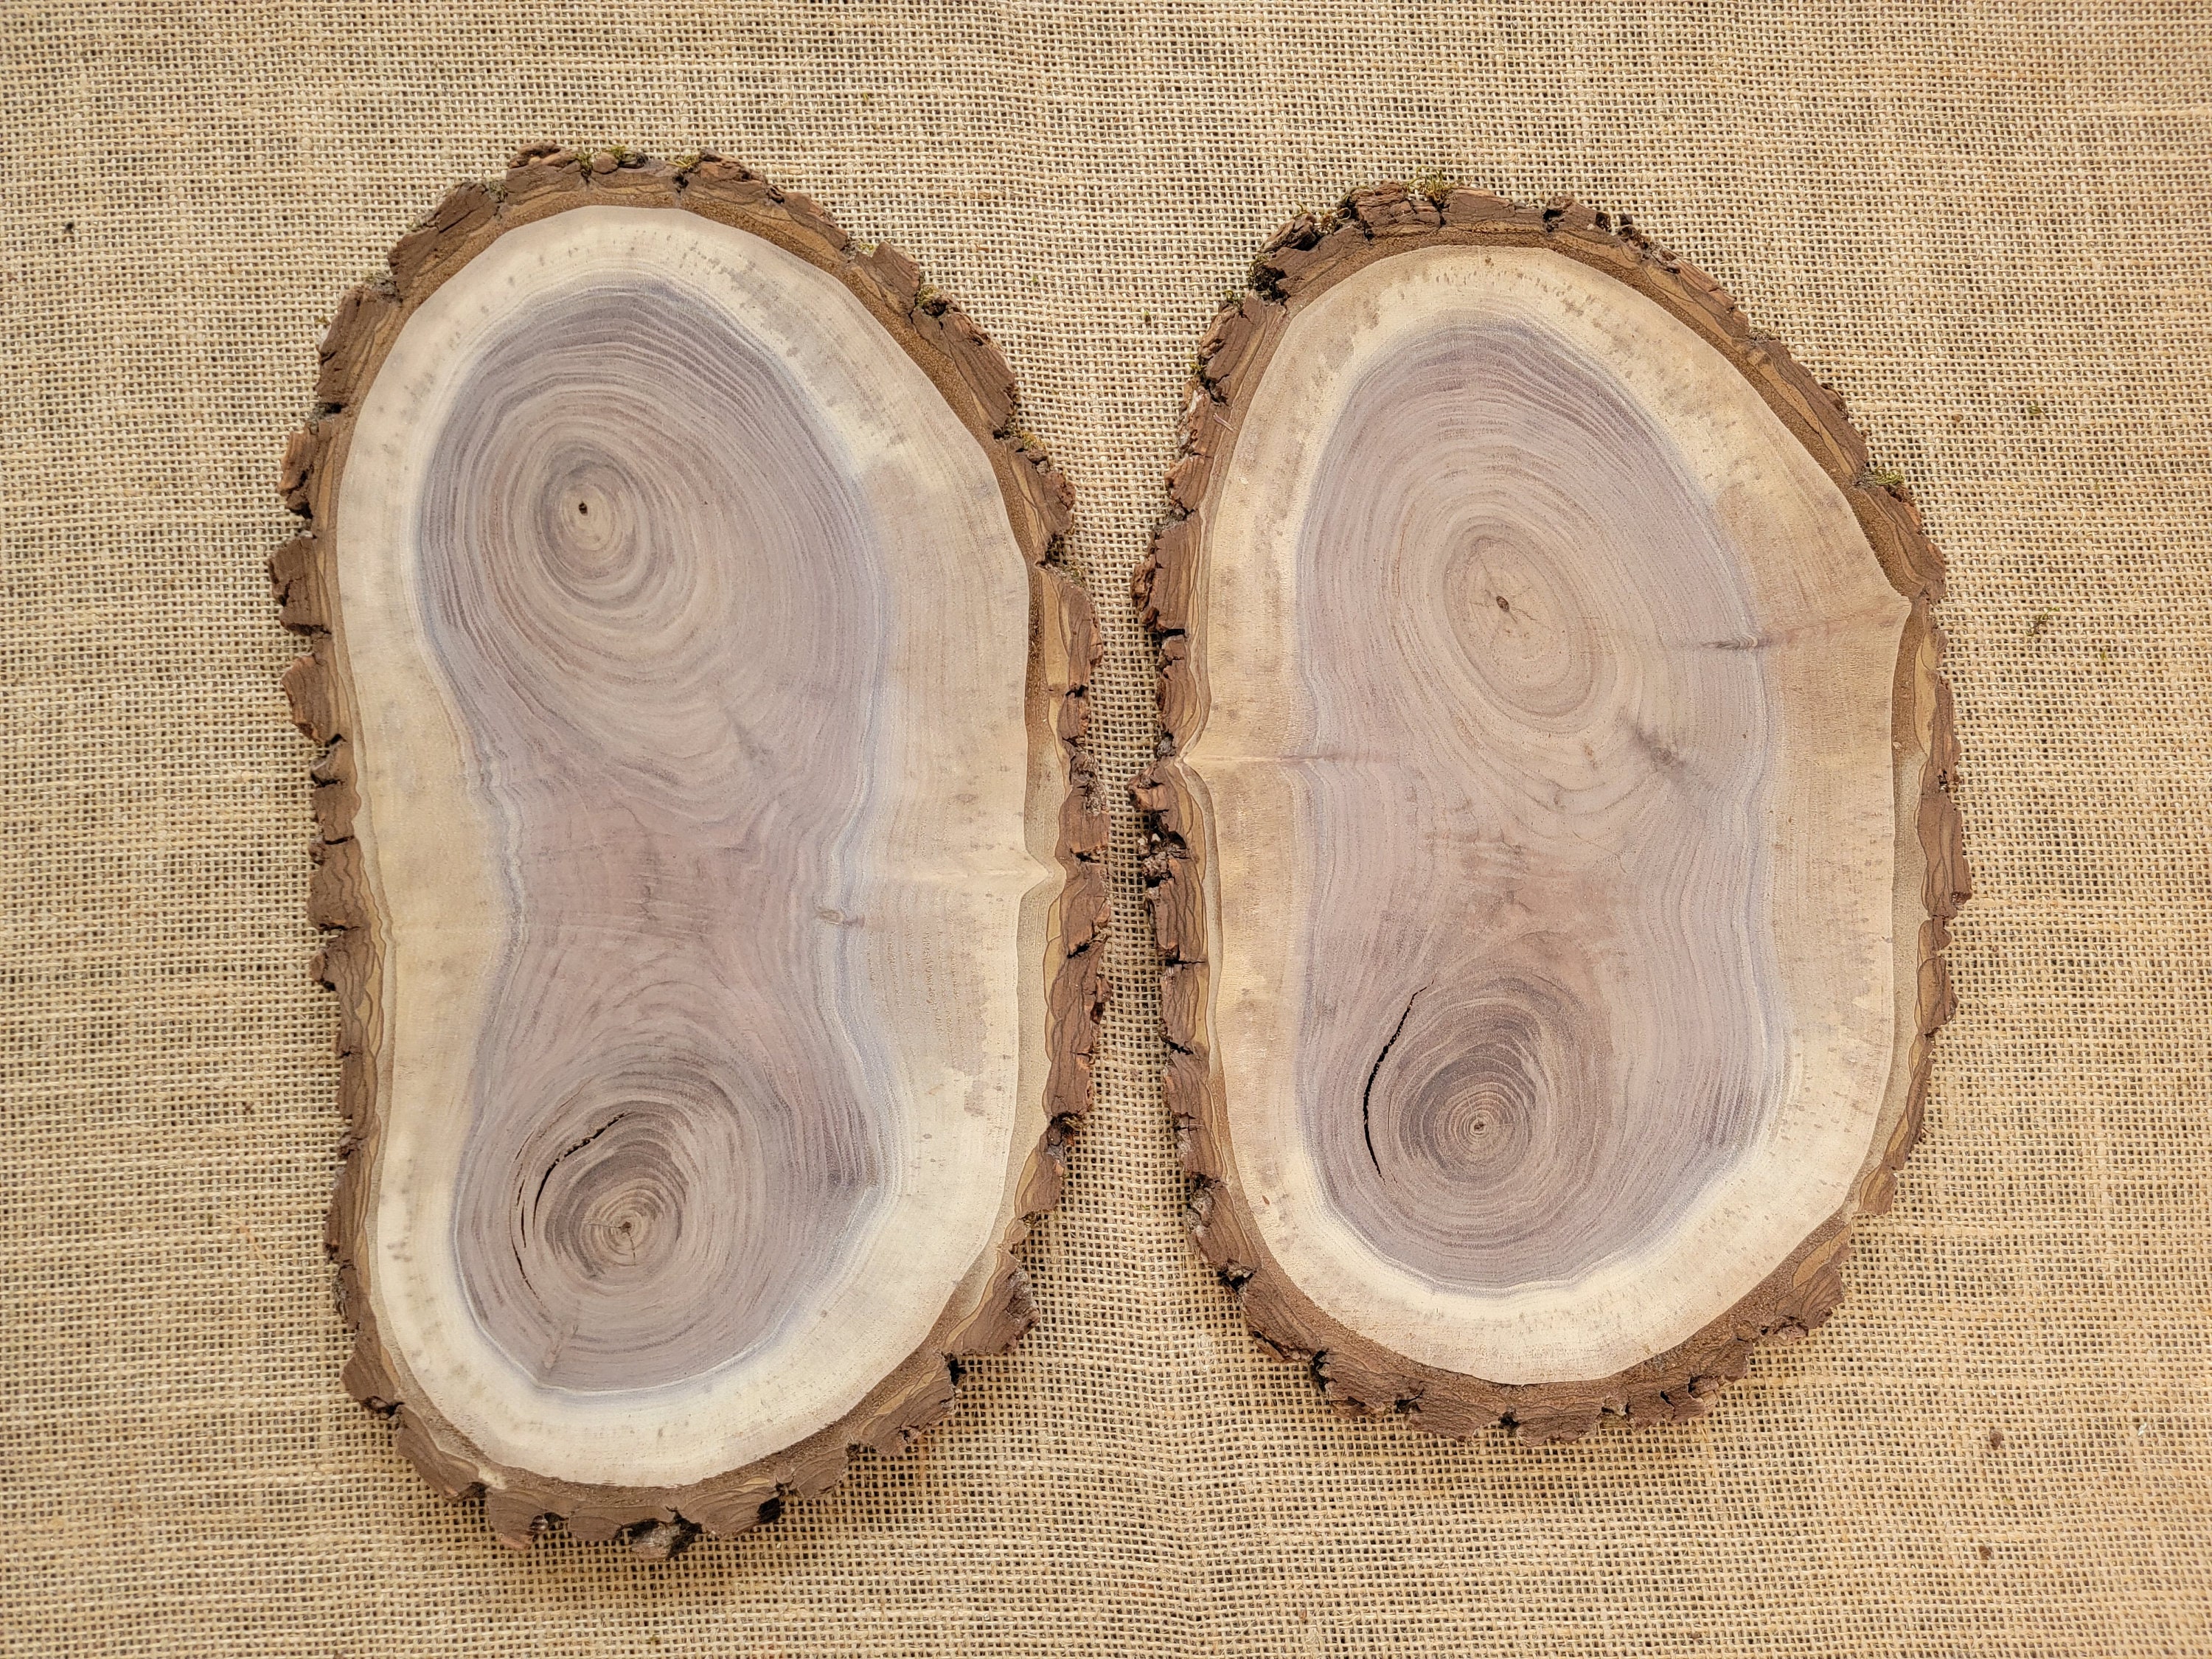 Five Kiln Dried 9 to 10 diameter x 1 thick Wood Slices, Wood Rounds, Wood  Slabs, Tree Slices, Wedding centerpieces, Woodland decor.